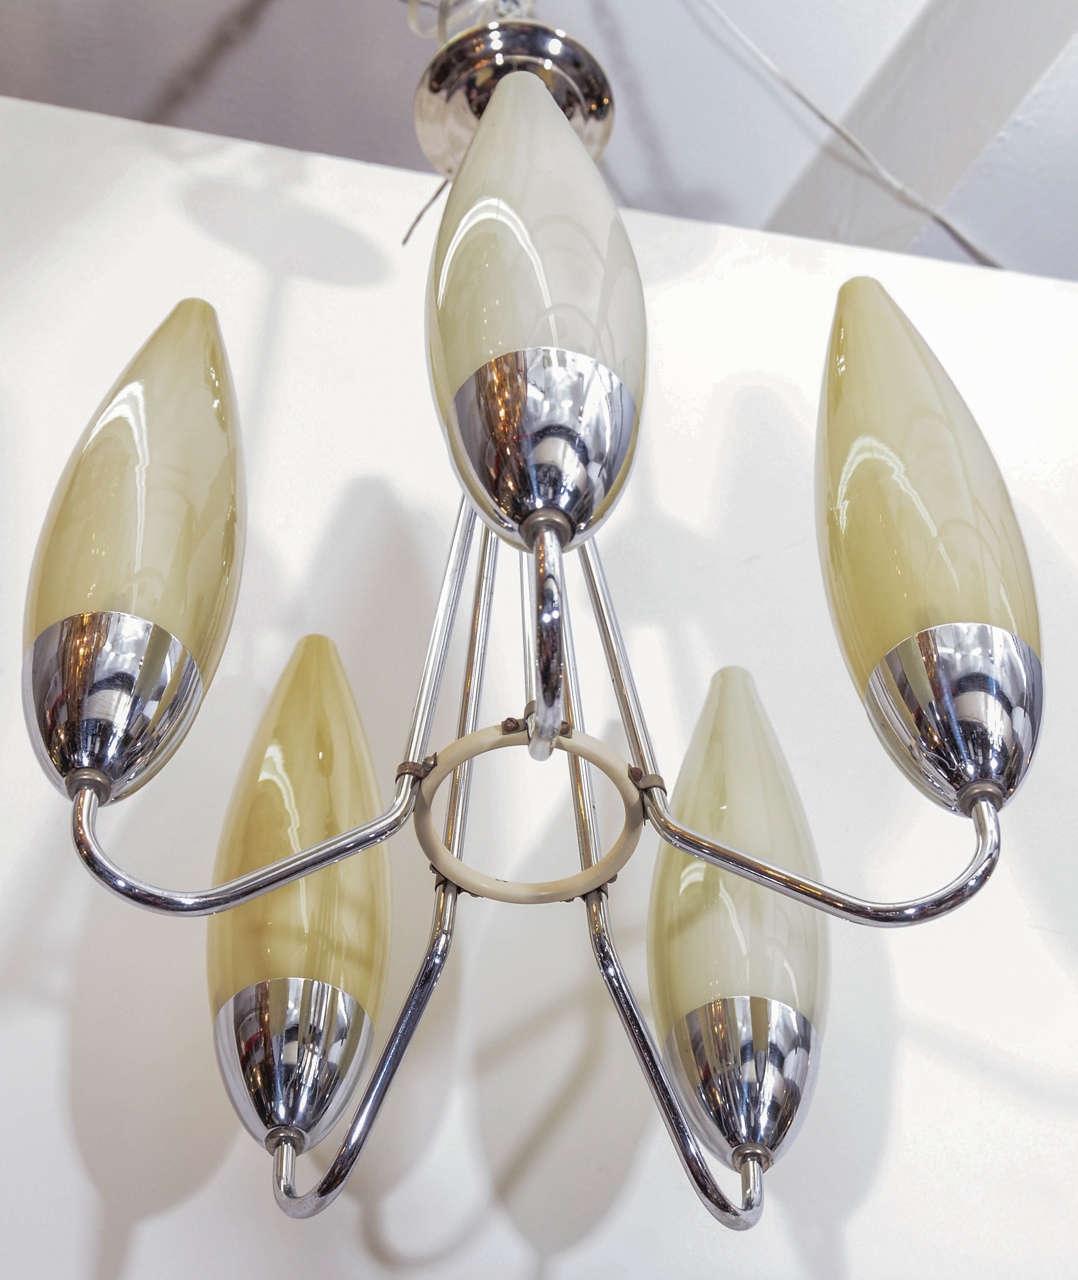 A vintage 1960's Italian five-light chandelier with chrome fixture and off-white glass tubular shades.